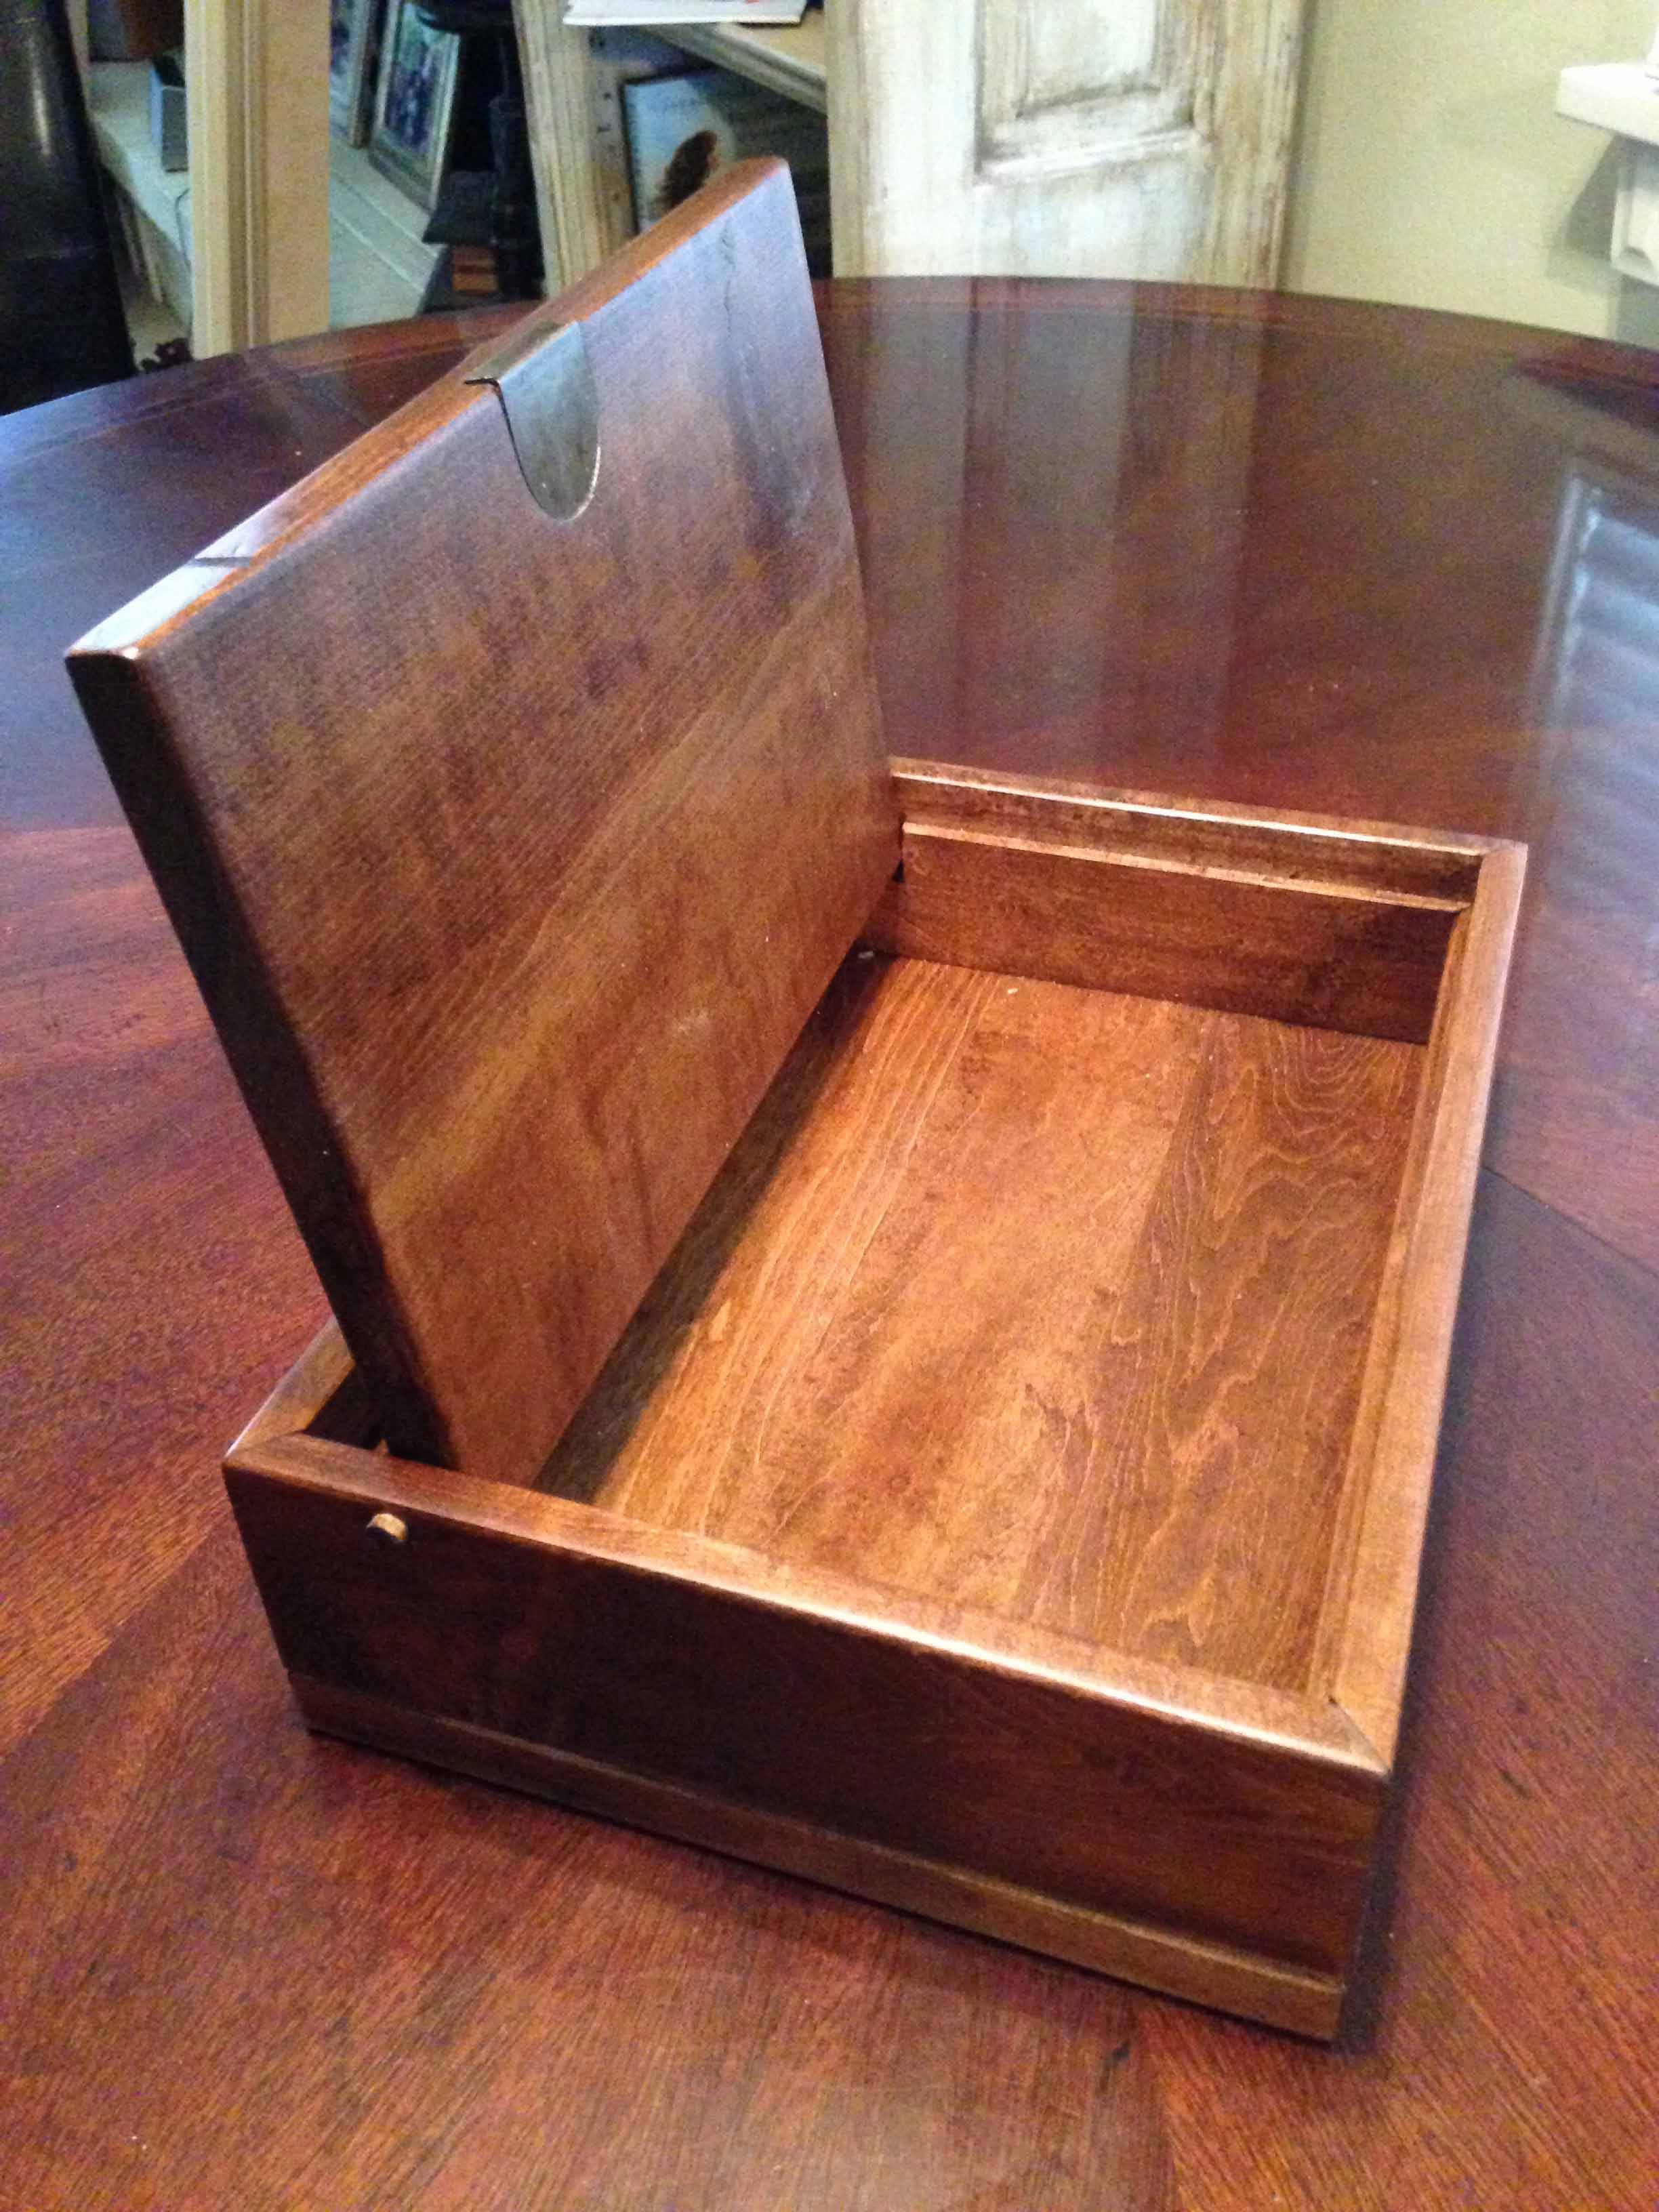 how-to-build-a-small-wooden-box-using-the-parts-from-an-old-dresser